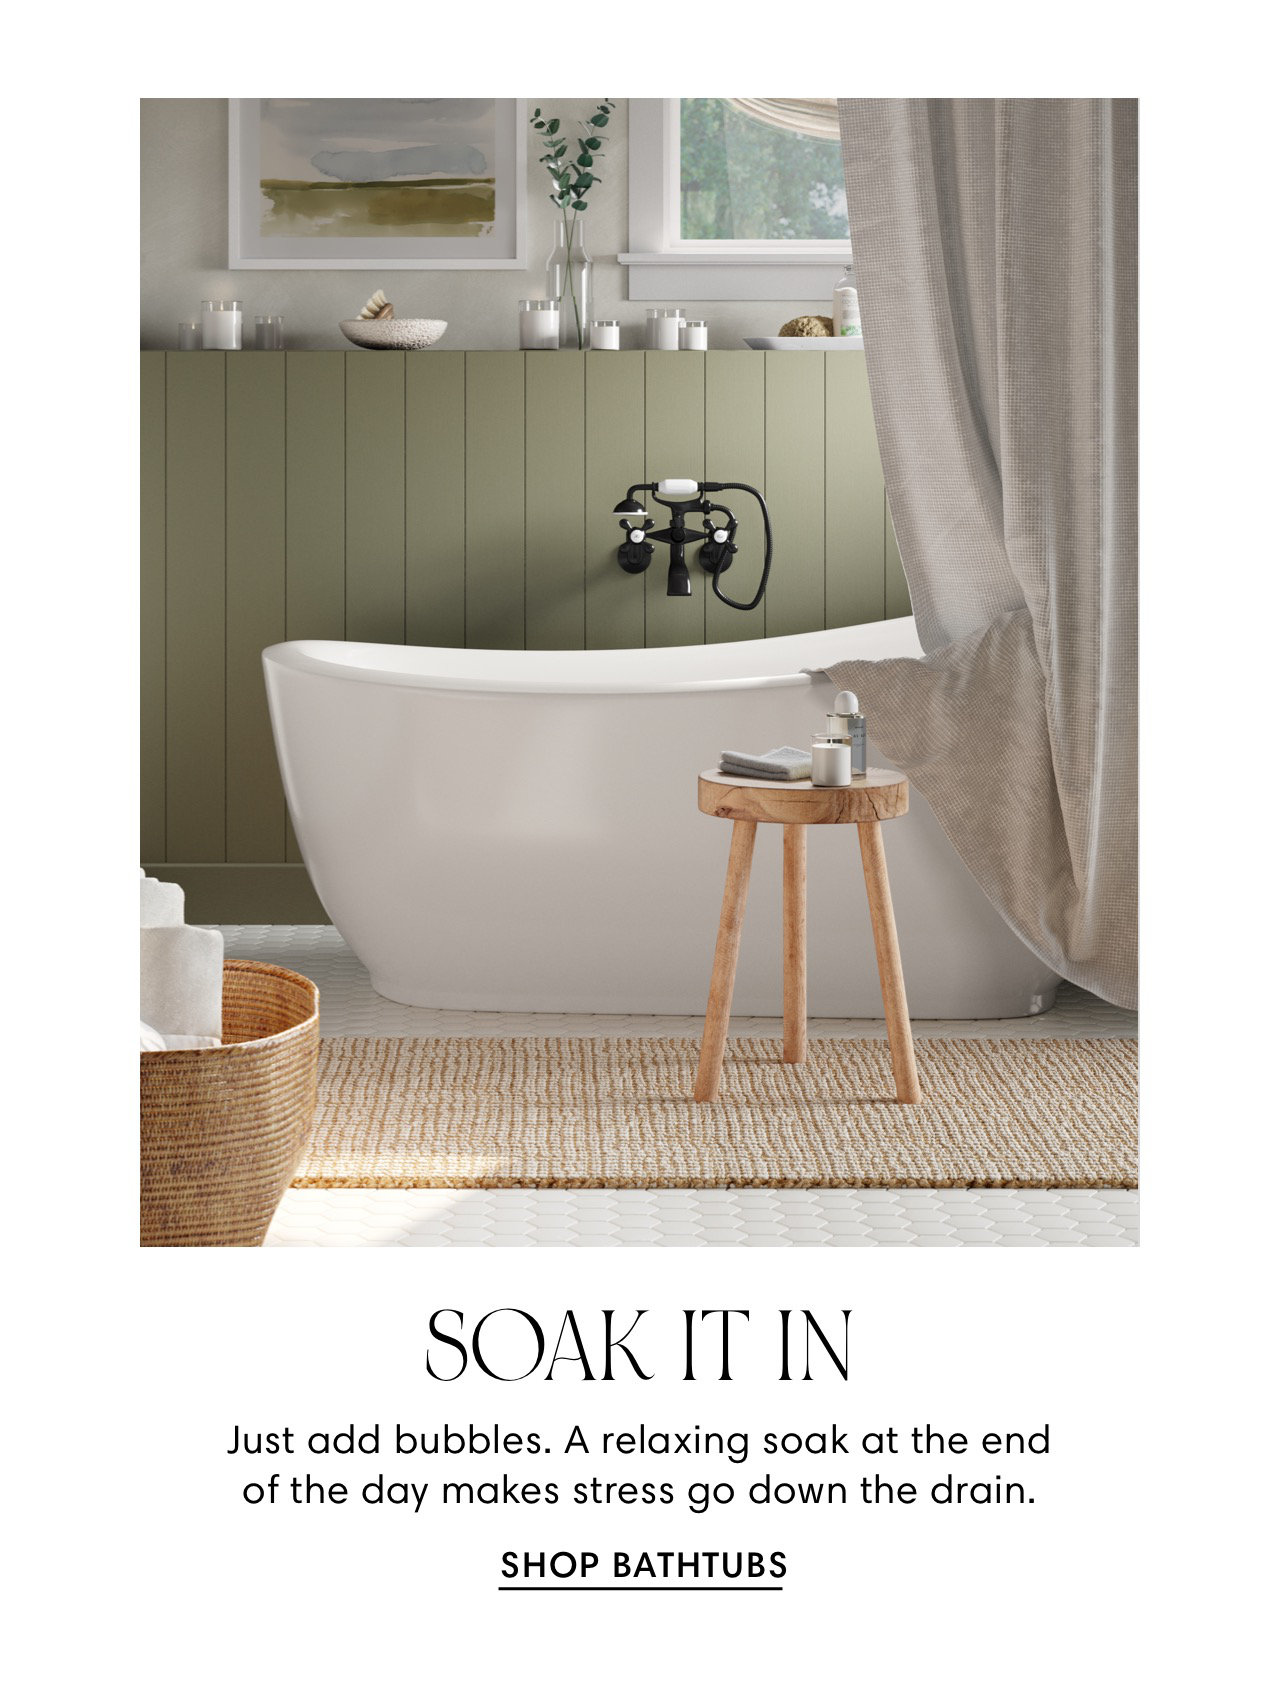  SOAK IT IN Just add bubbles. A relaxing soak at the end of the day makes stress go down the drain. SHOP BATHTUBS 